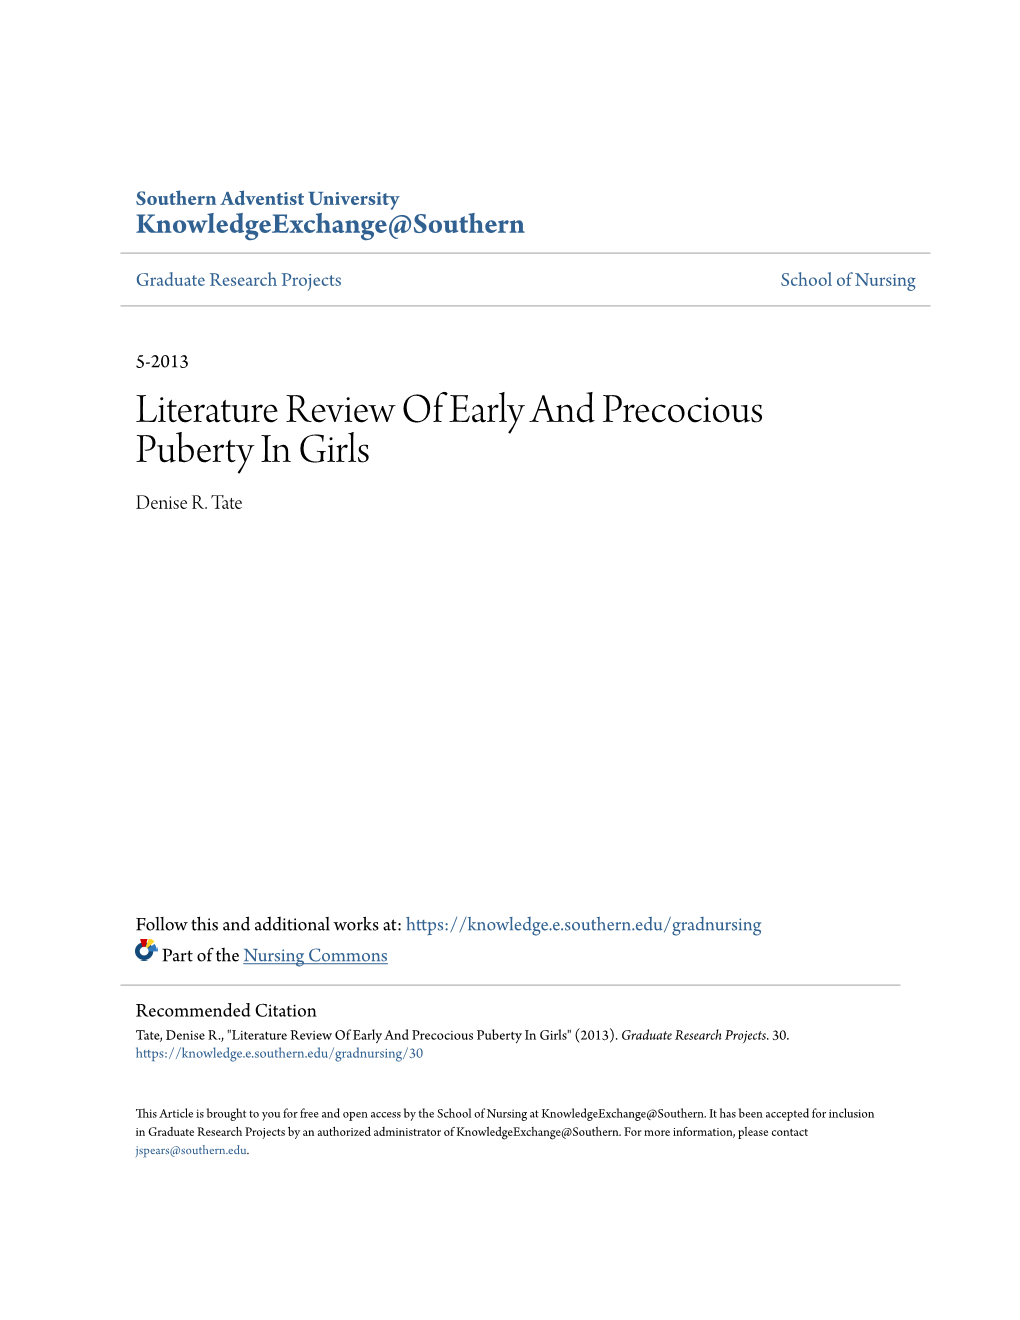 Literature Review of Early and Precocious Puberty in Girls Denise R